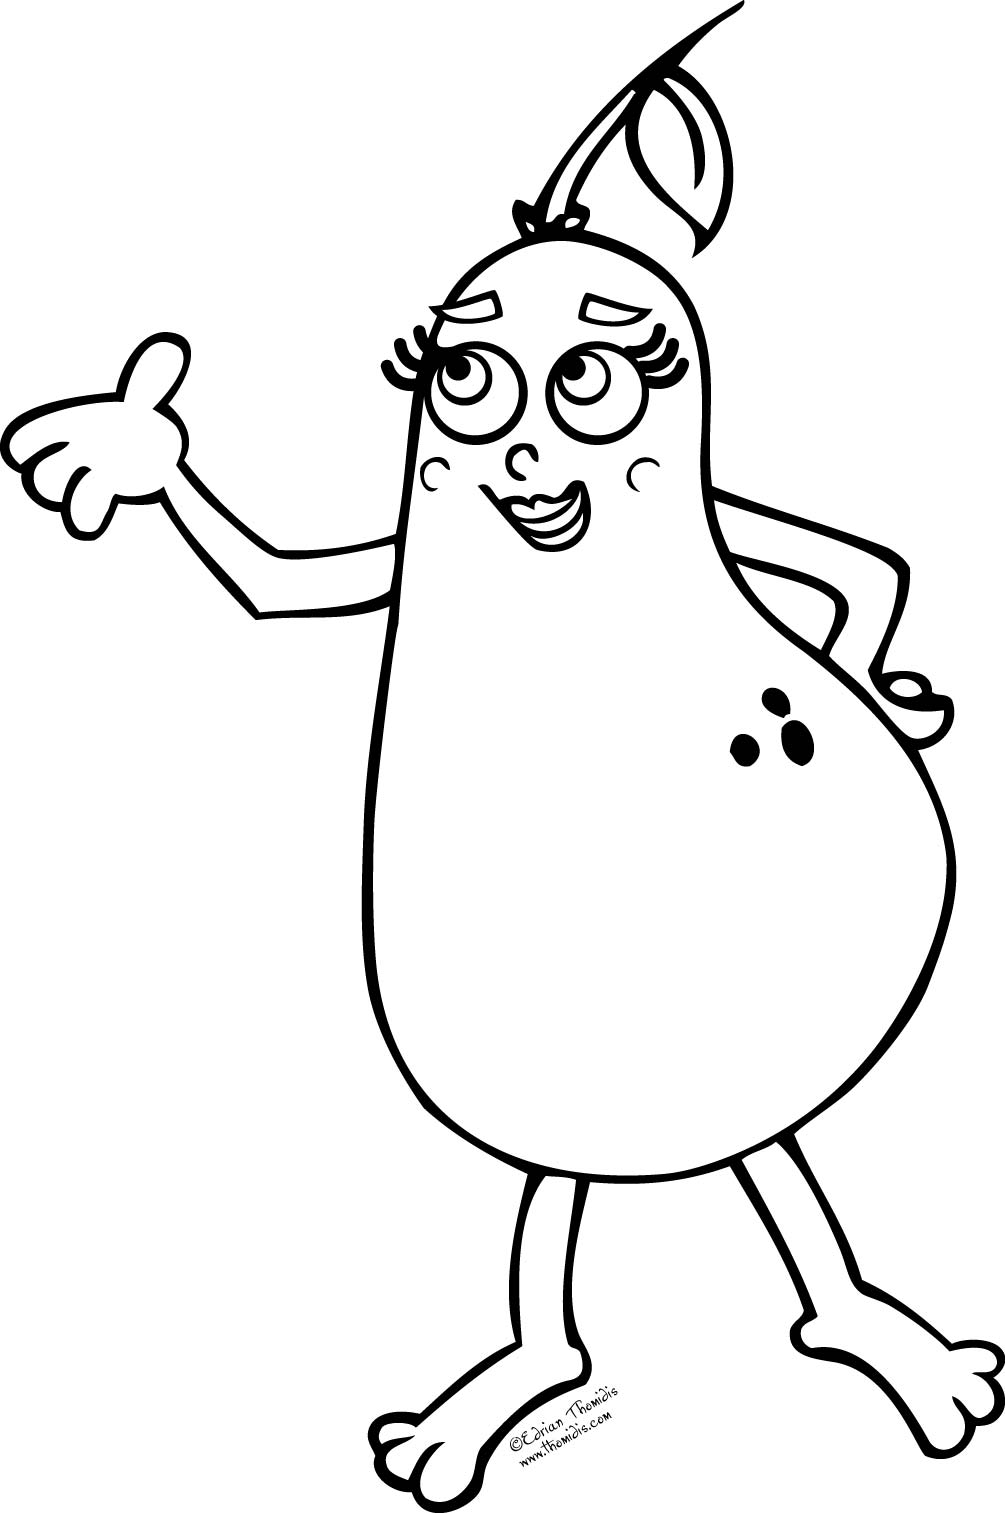 A picture paints a thousand words: FREE COLORING PAGE : PEAR